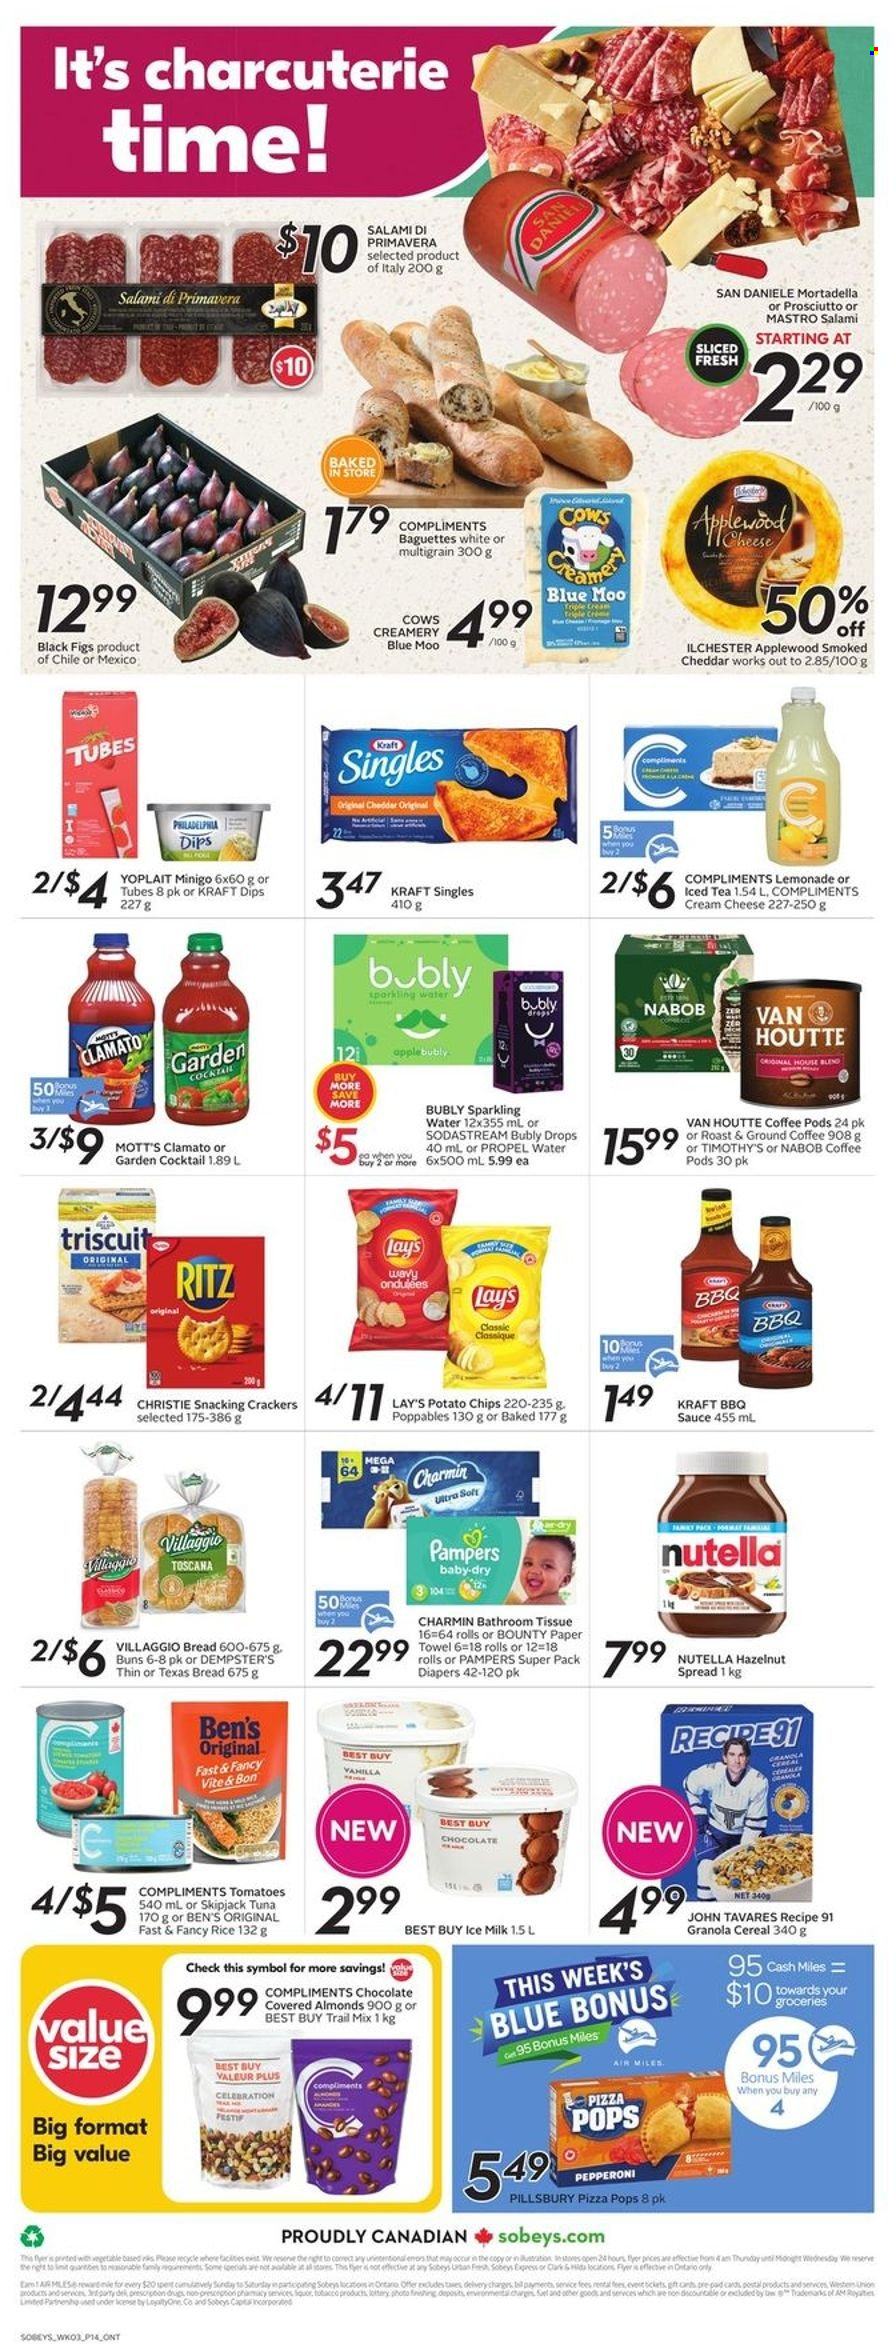 thumbnail - Circulaire Sobeys - 19 Mai 2022 - 25 Mai 2022 - Produits soldés - baguette, mortadella, prosciutto, Yoplait, granola, chips, crackers, Lay’s, SodaStream, Nutella, Pampers. Page 4.